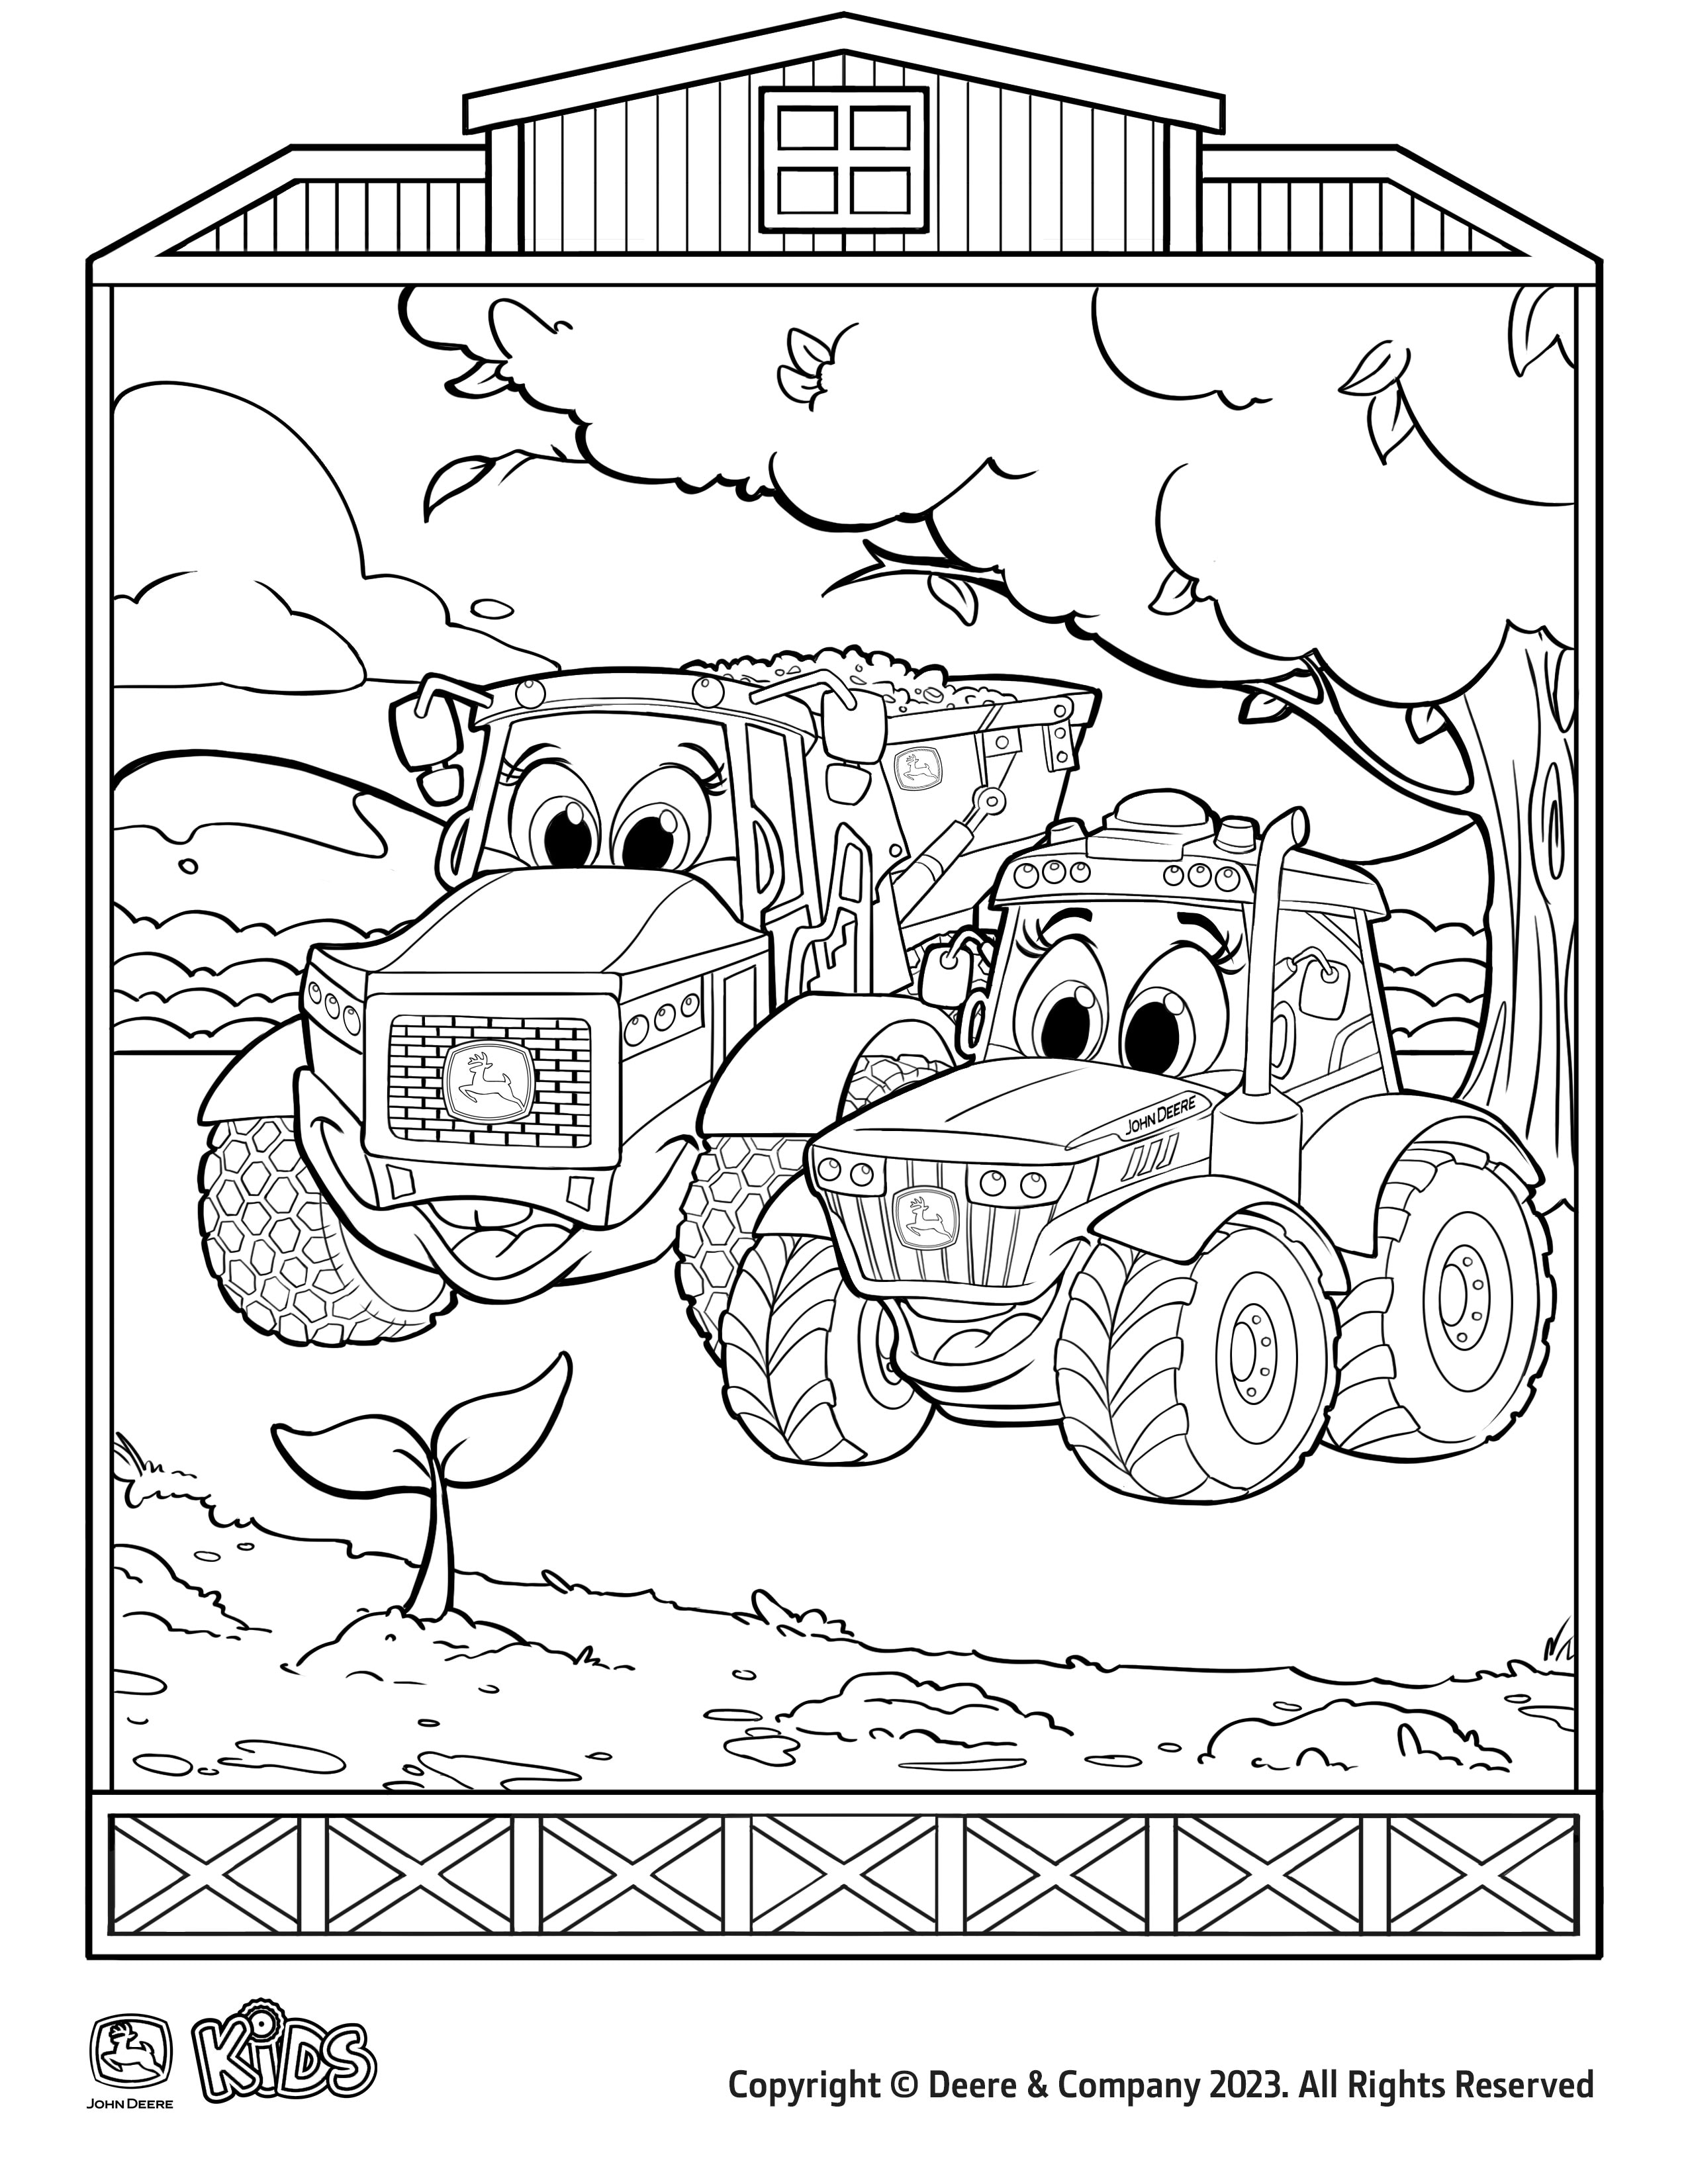 Free Downloadable Colouring Pages for Adults - Michael O'Mara Books